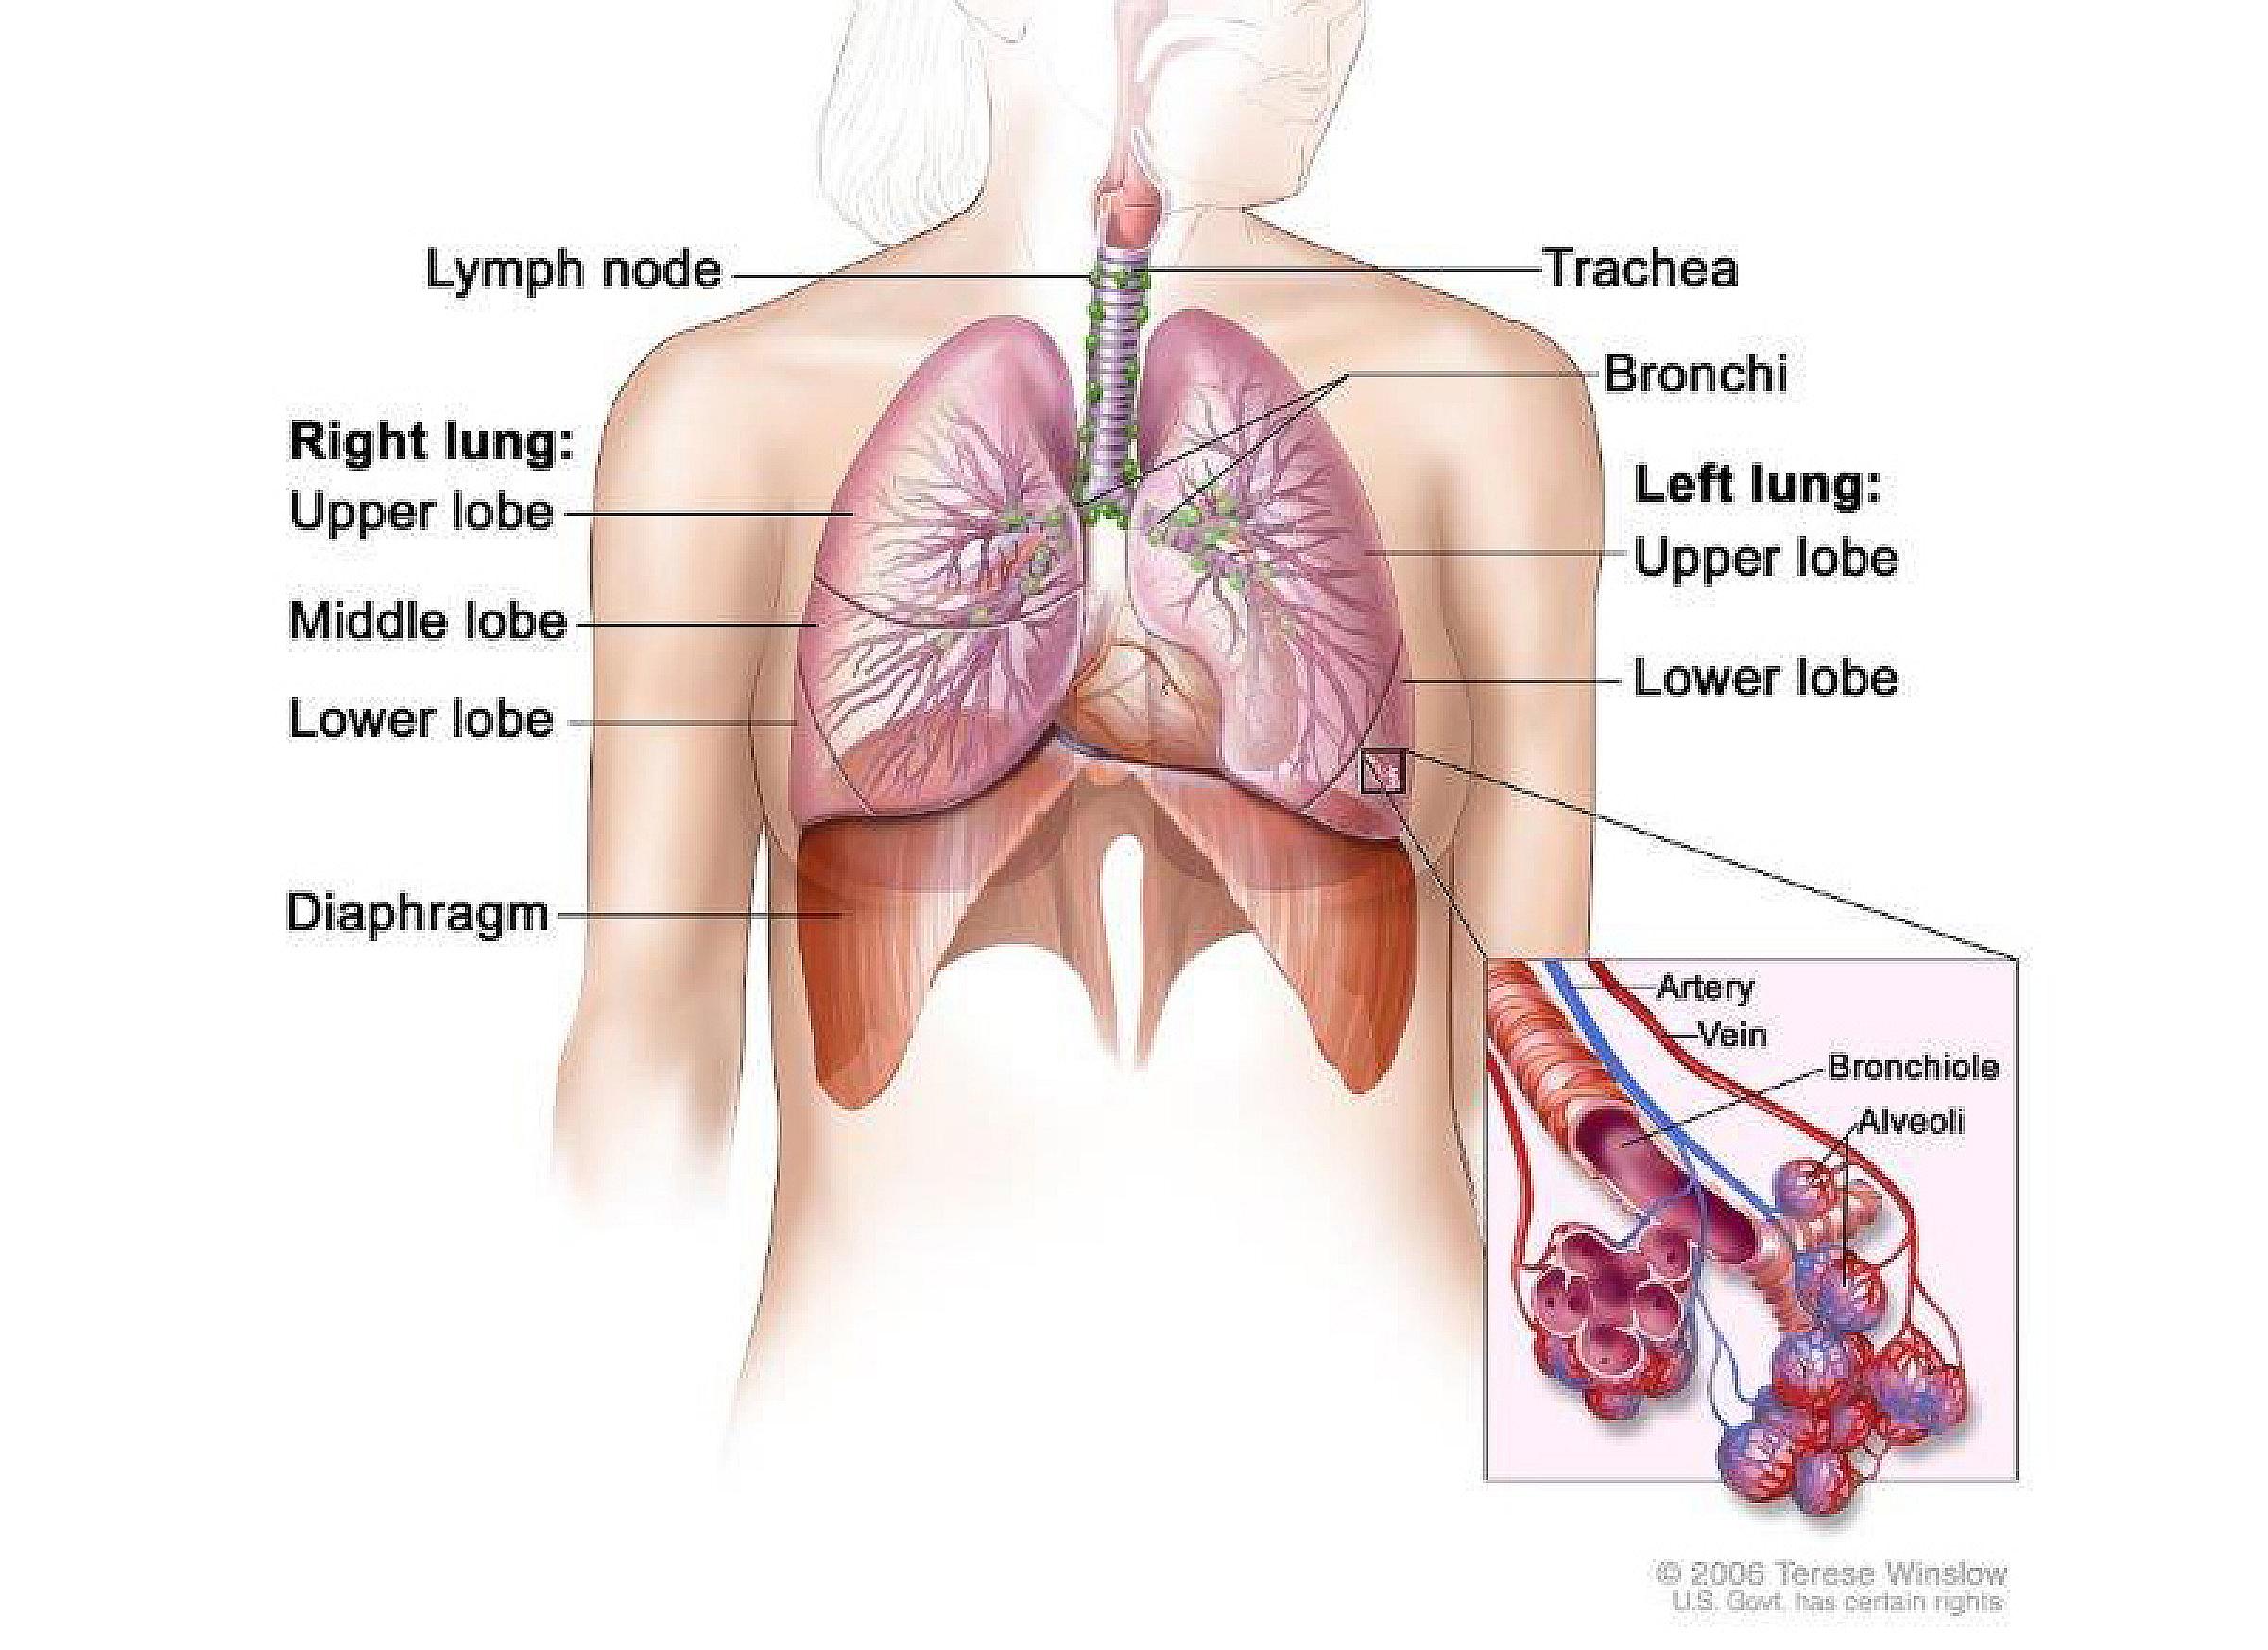 Anatomy of the respiratory system, showing the trachea and both lungs and their lobes and airways. Lymph nodes and the diaphragm are also shown. Oxygen is inhaled into the lungs and passes through the thin membranes of the alveoli and into the bloodstream (see inset).